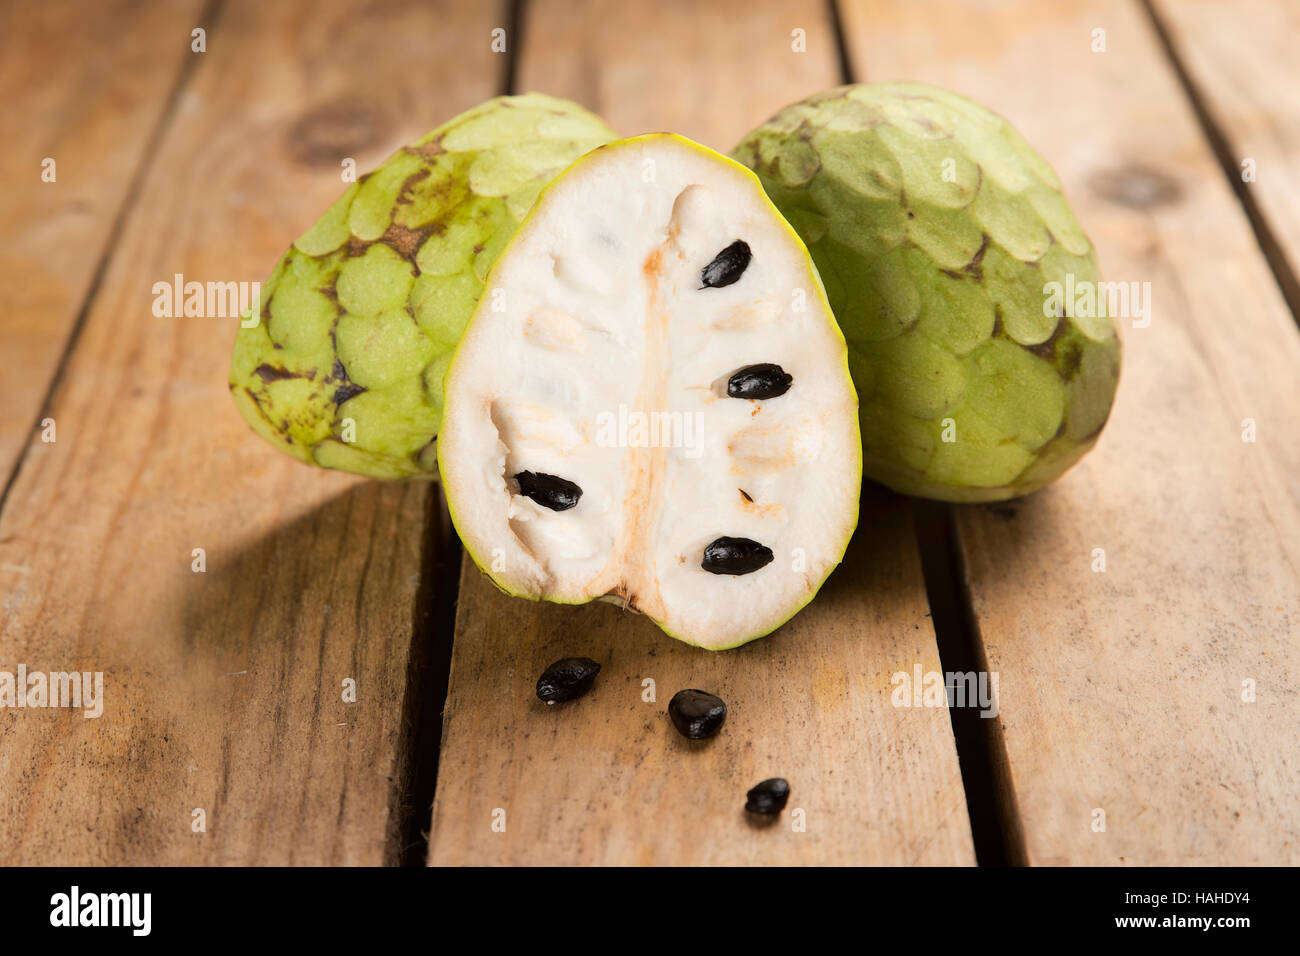 Cherimoya tropical fruit with a sweet flavor and intense Stock Photo